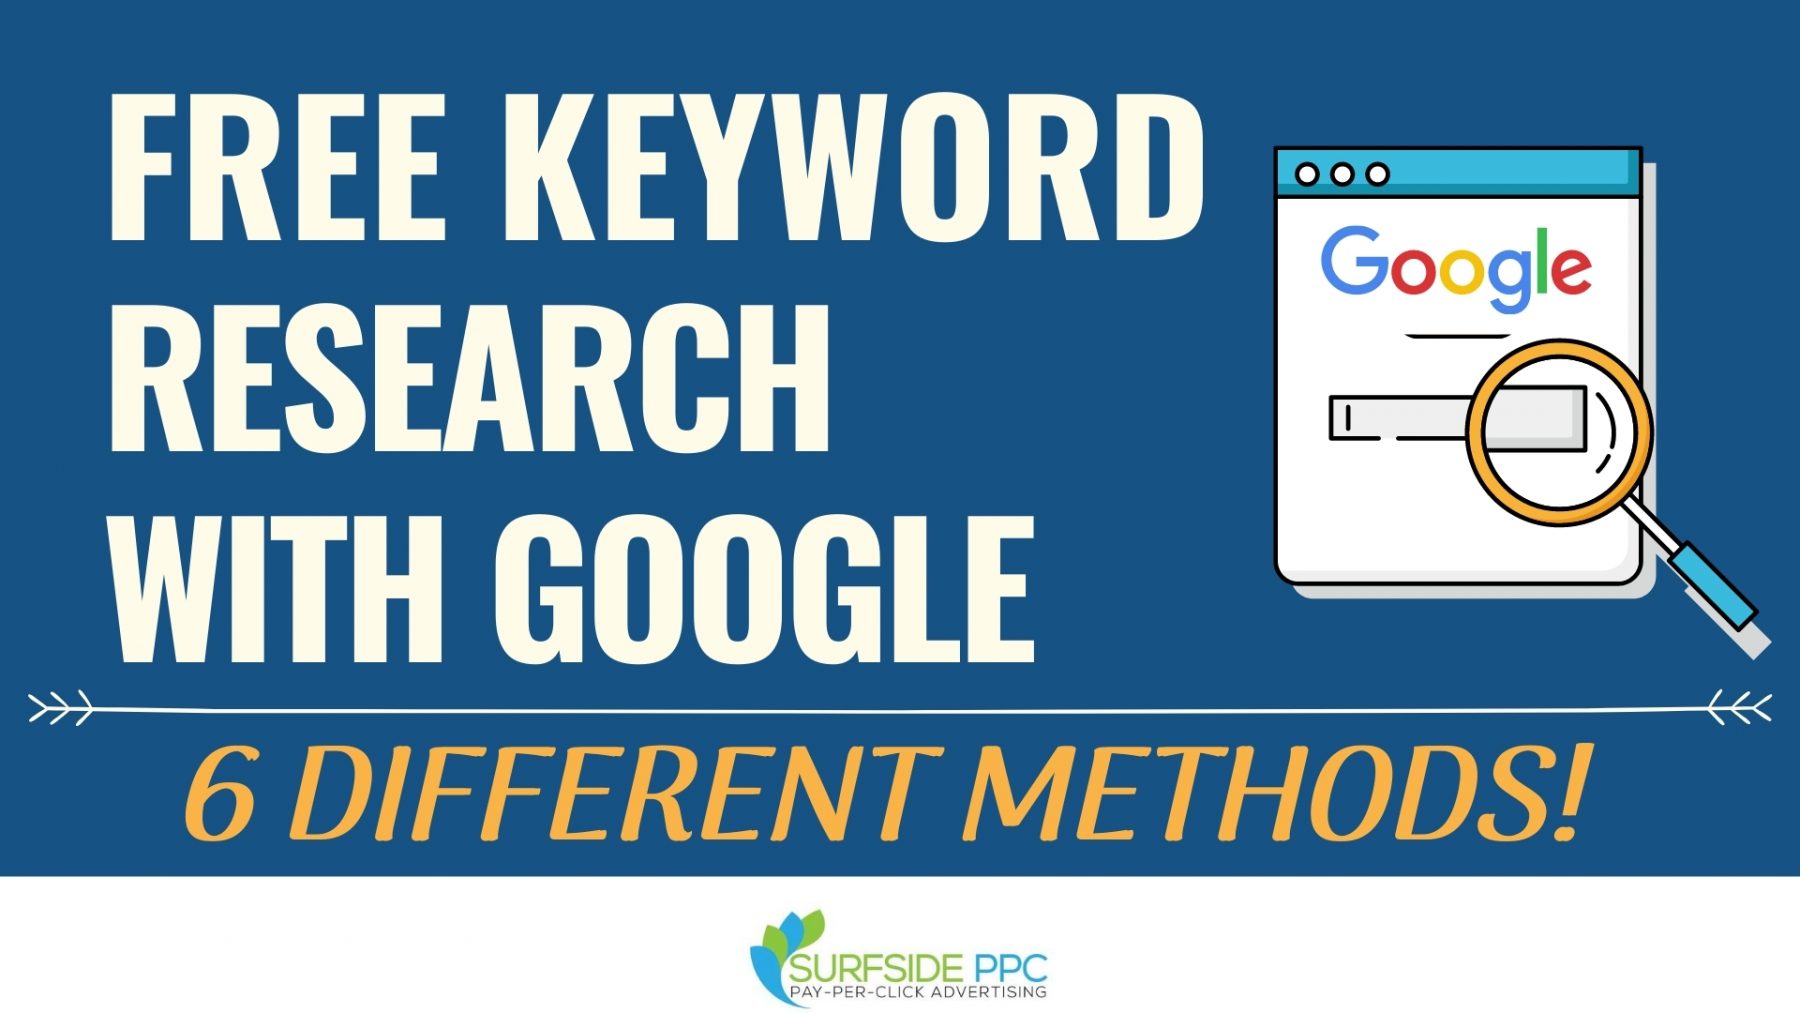 Google Keyword Research: 6 Awesome Methods To Use